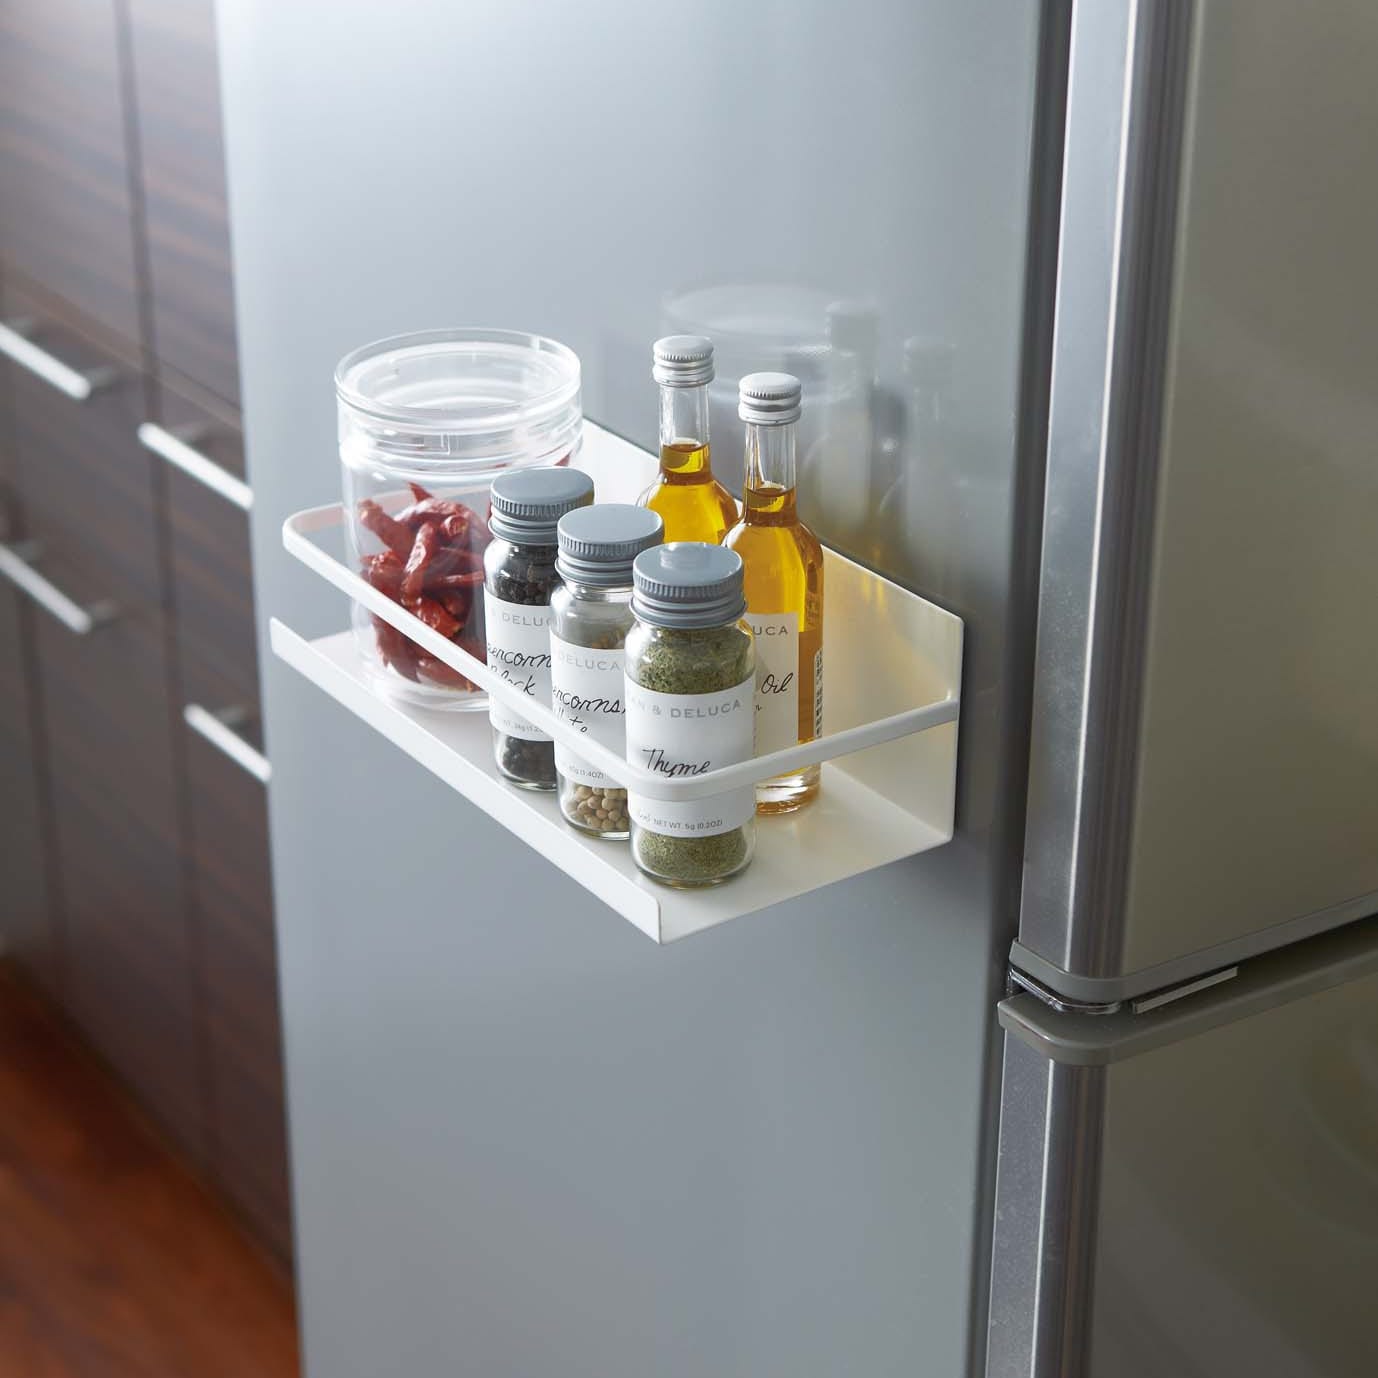 https://ak1.ostkcdn.com/images/products/13373461/Plate-Magnetic-Spice-Rack-White-549fa875-3adf-494b-a574-b09528749286.jpg